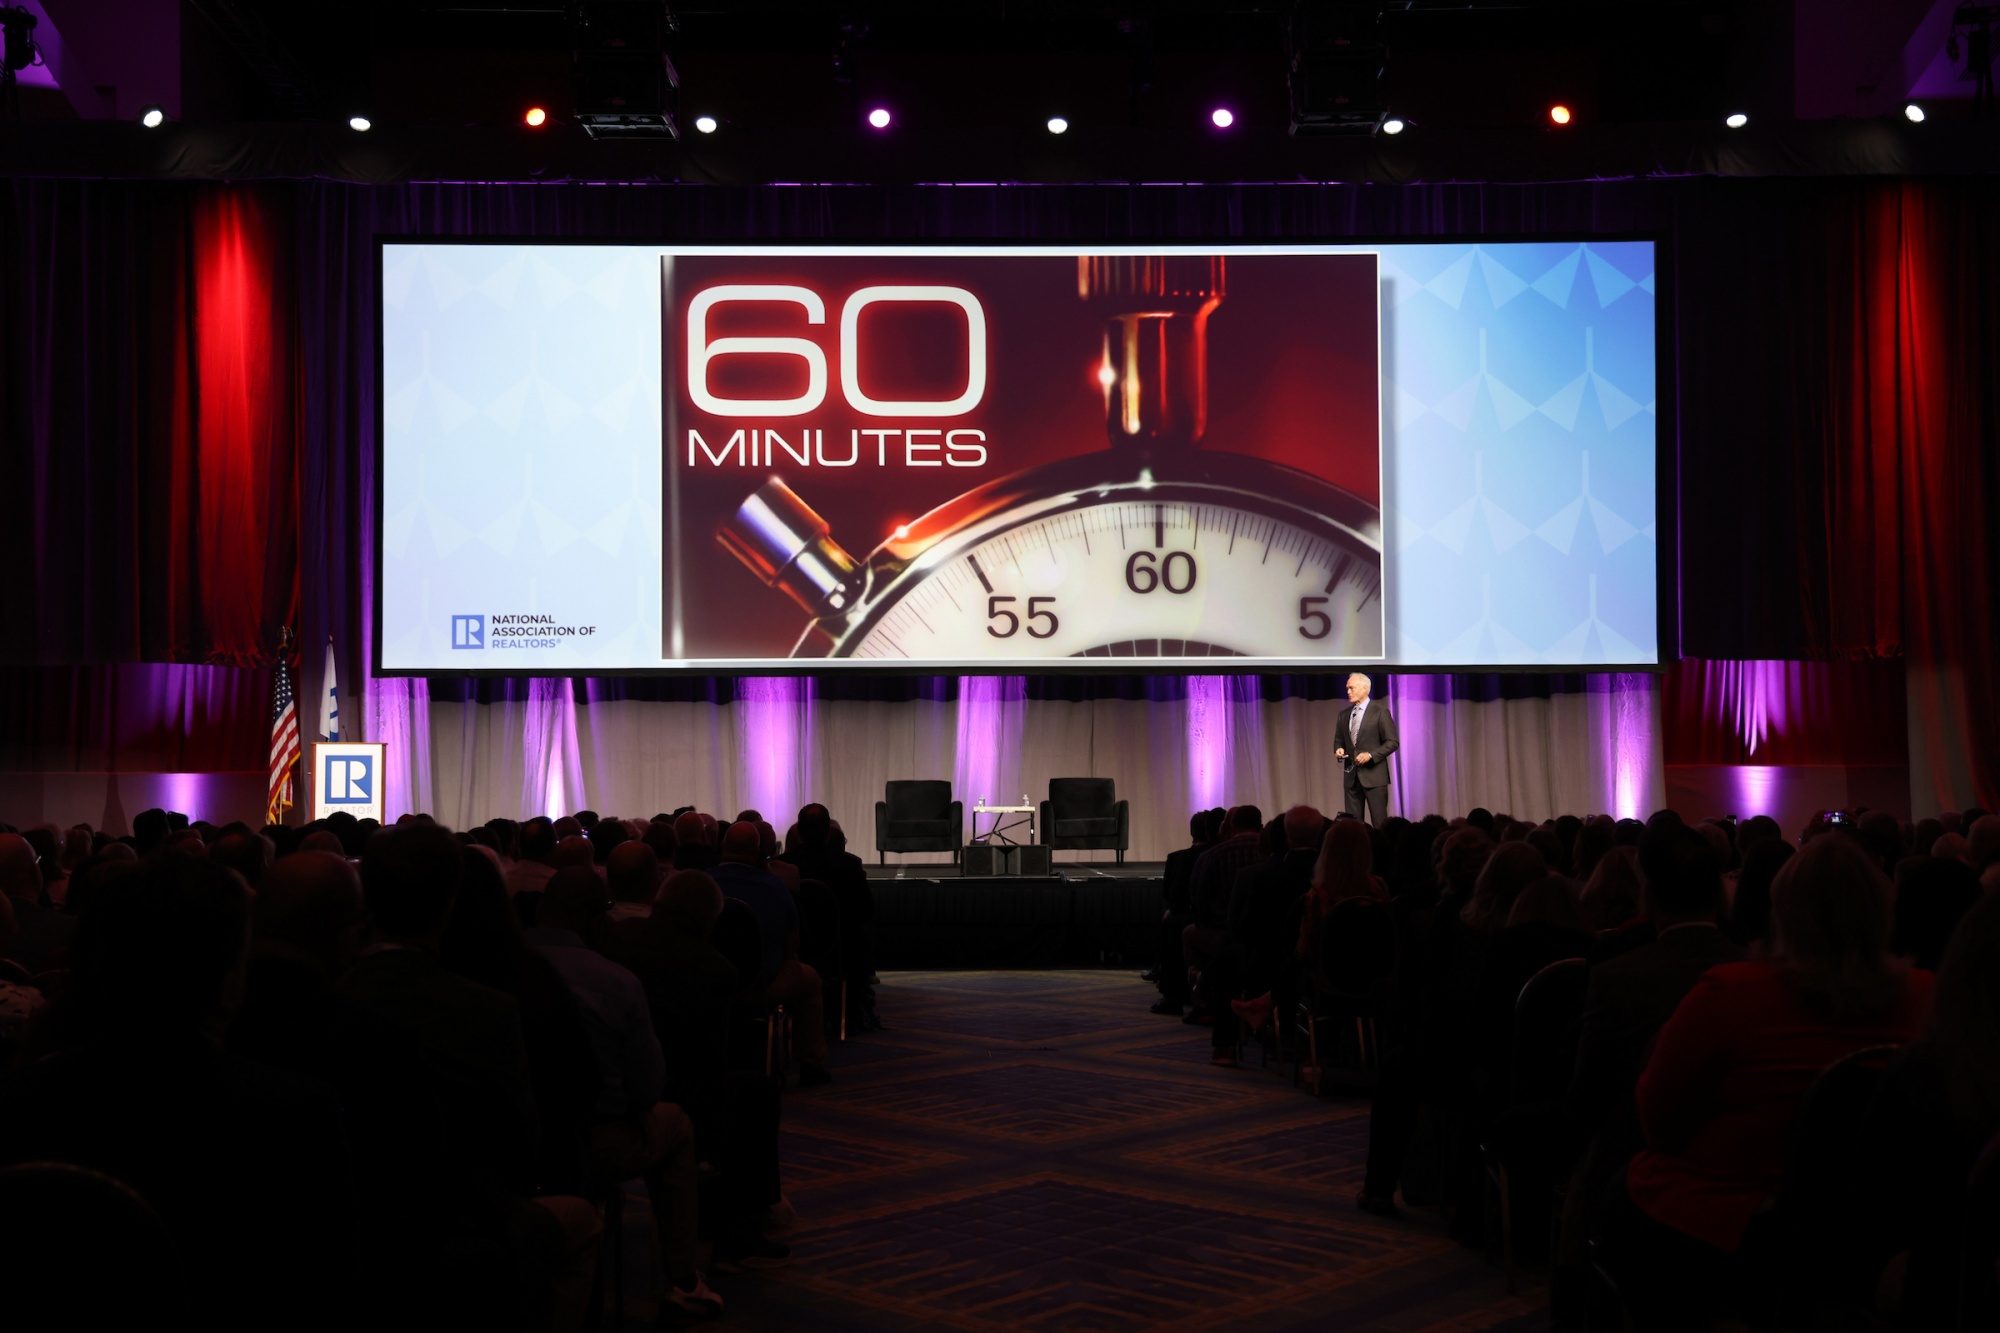 View of General Session stage with 60 Minutes image on screen for Scott Pelley: Truth Worth Telling